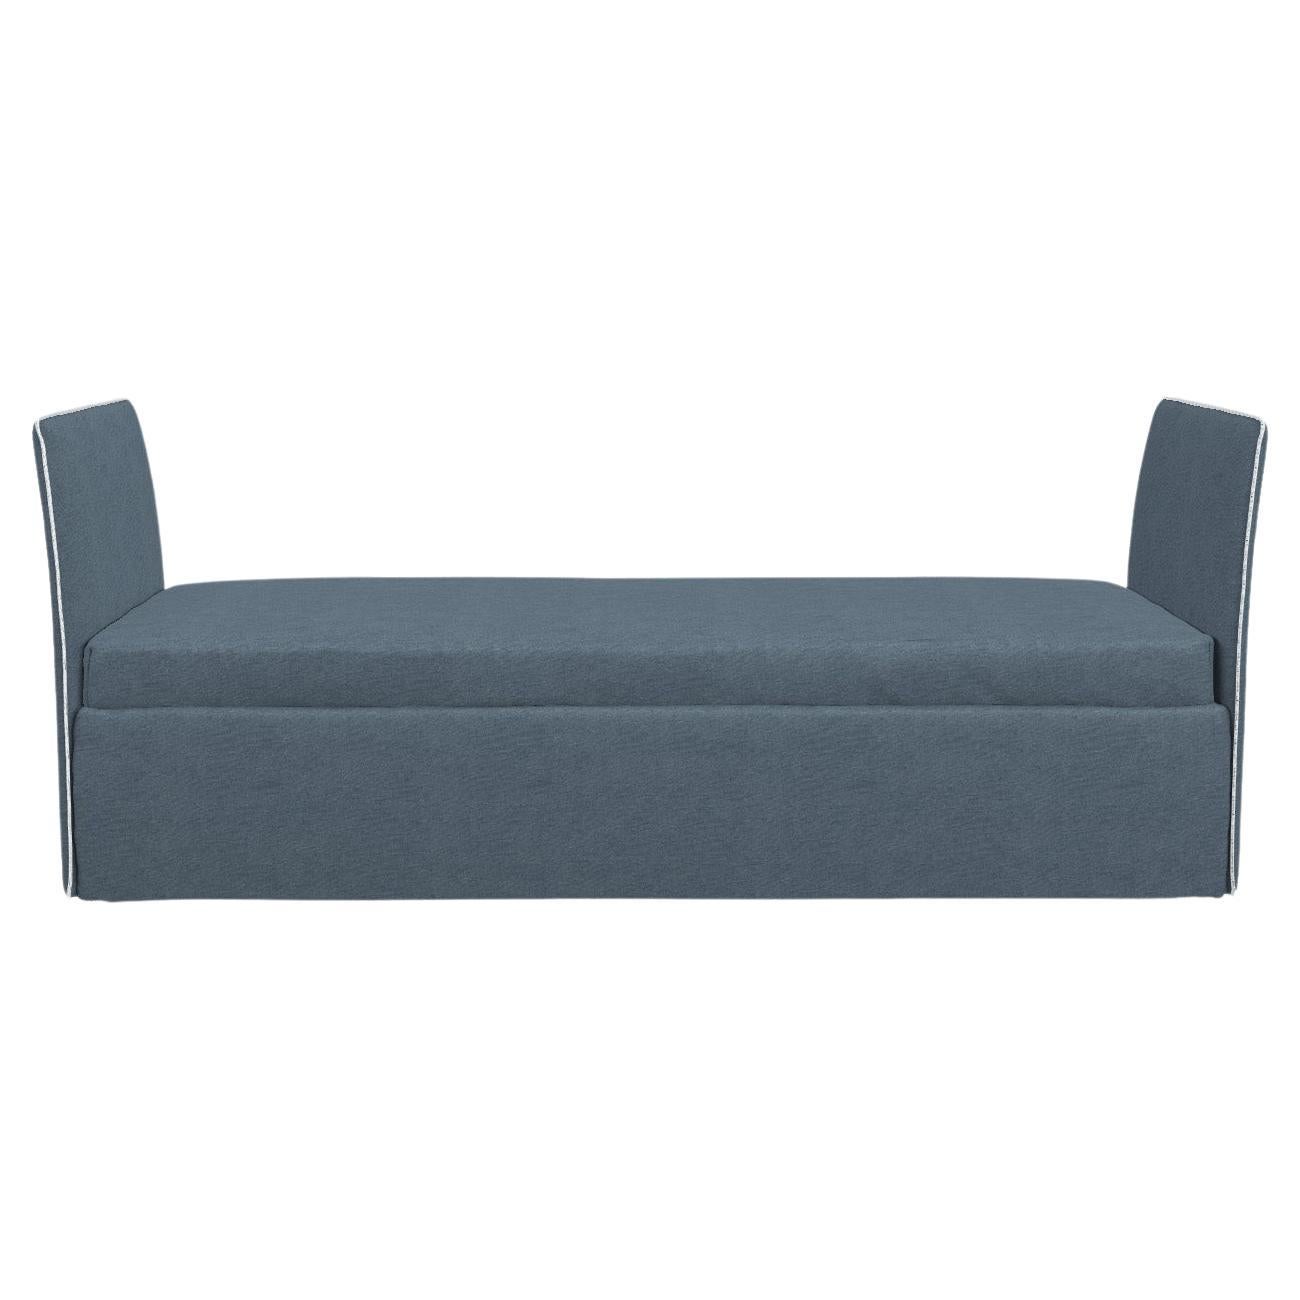 Gervasoni Open 2 Large Modular Bed Sofa in Munch Upholstery by Paola Navone For Sale